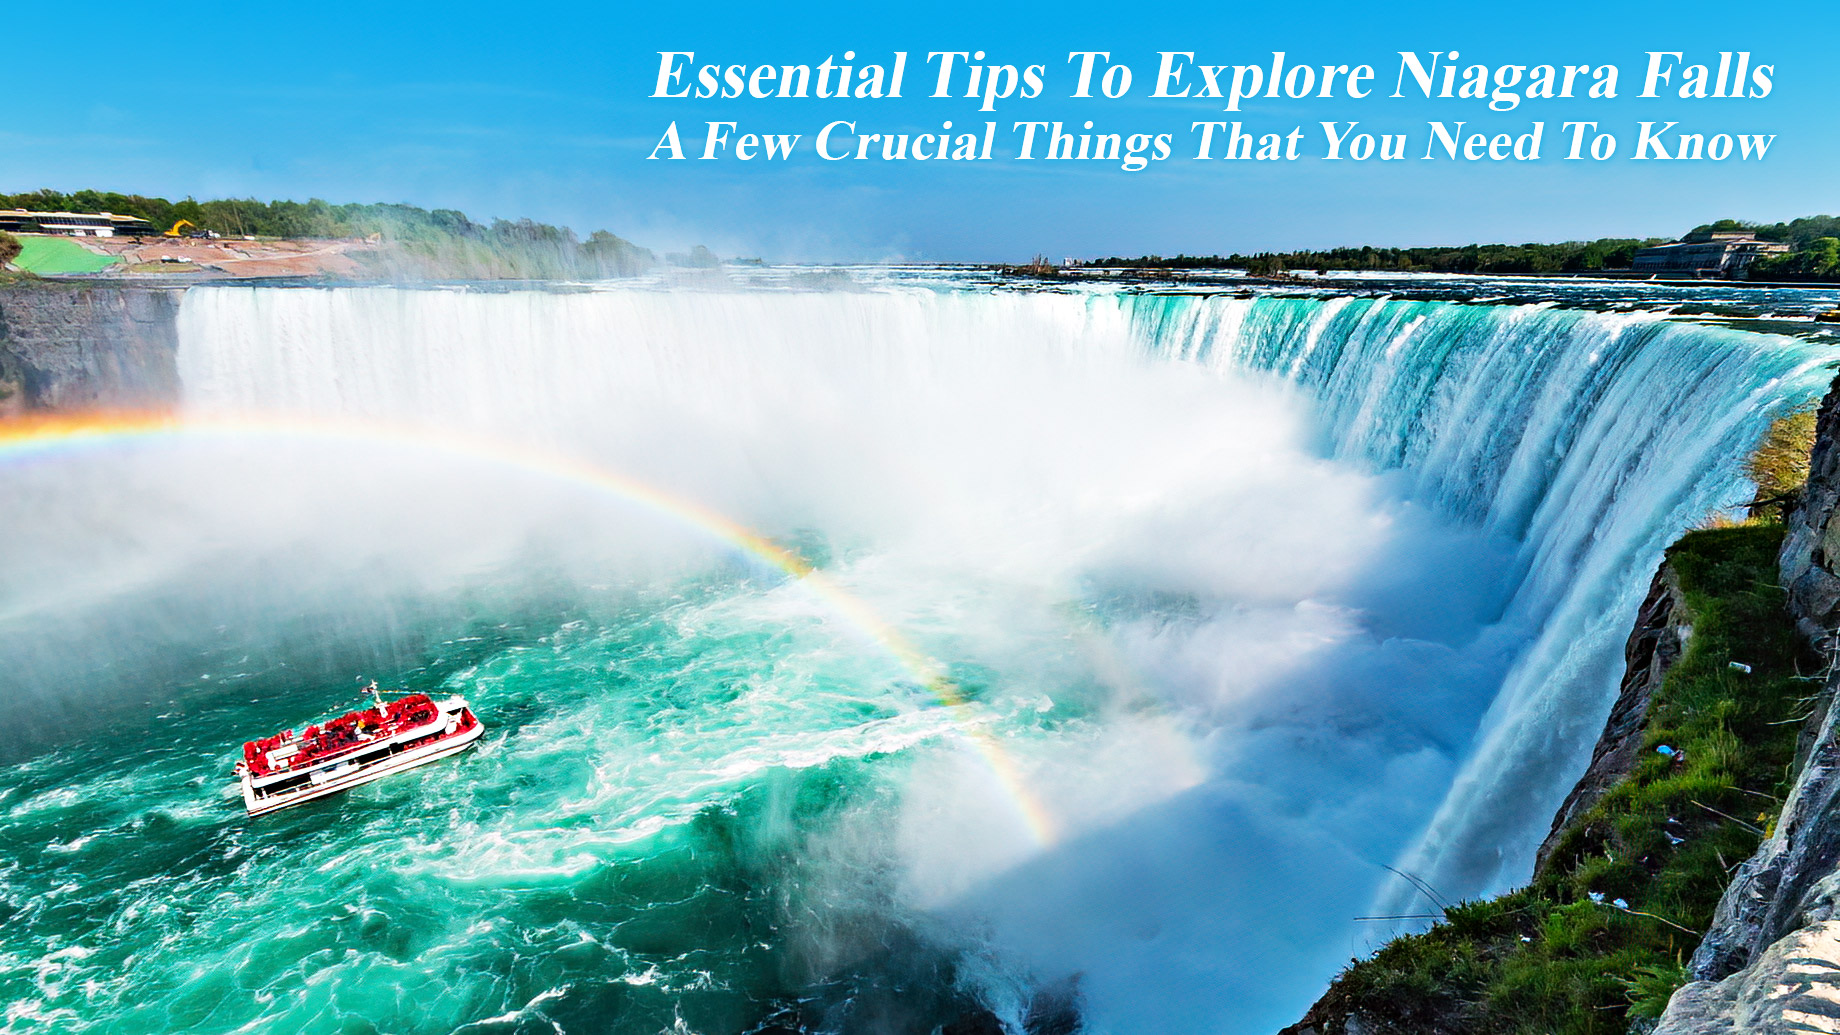 Essential Tips To Explore Niagara Falls - A Few Crucial Things That You Need To Know